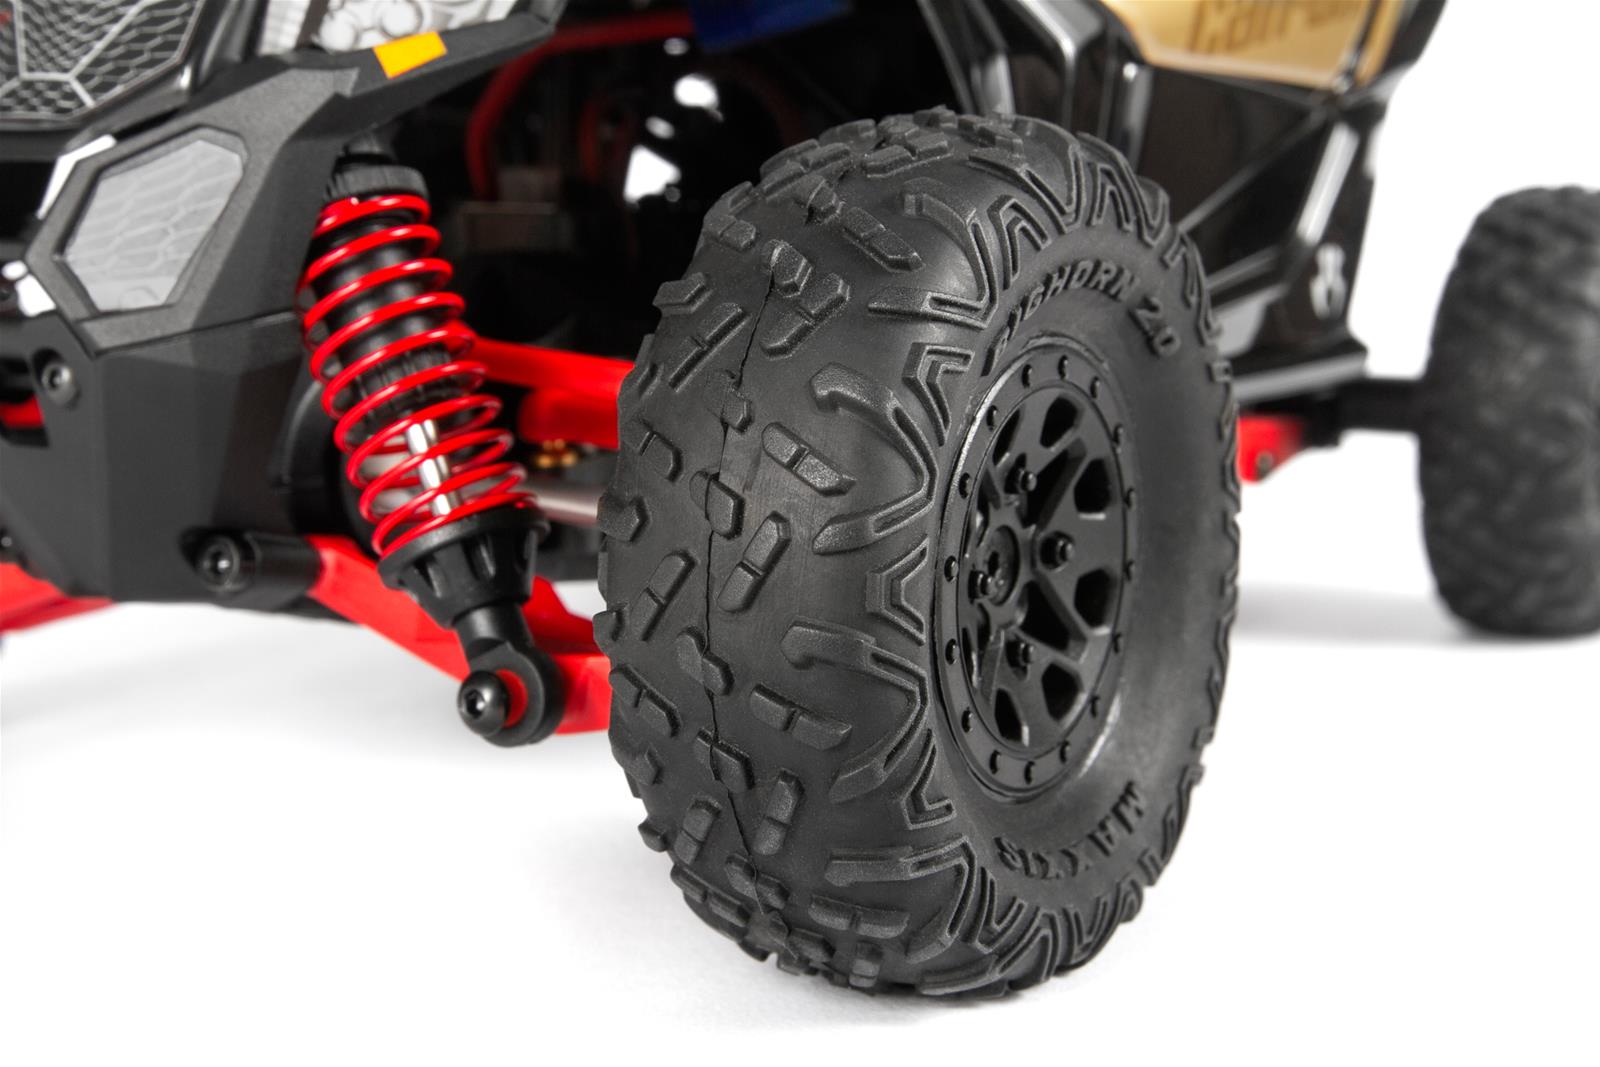 Axial Racing AXI90069 Axial Yeti Jr. 1:18 Scale RC Side-x-Sides